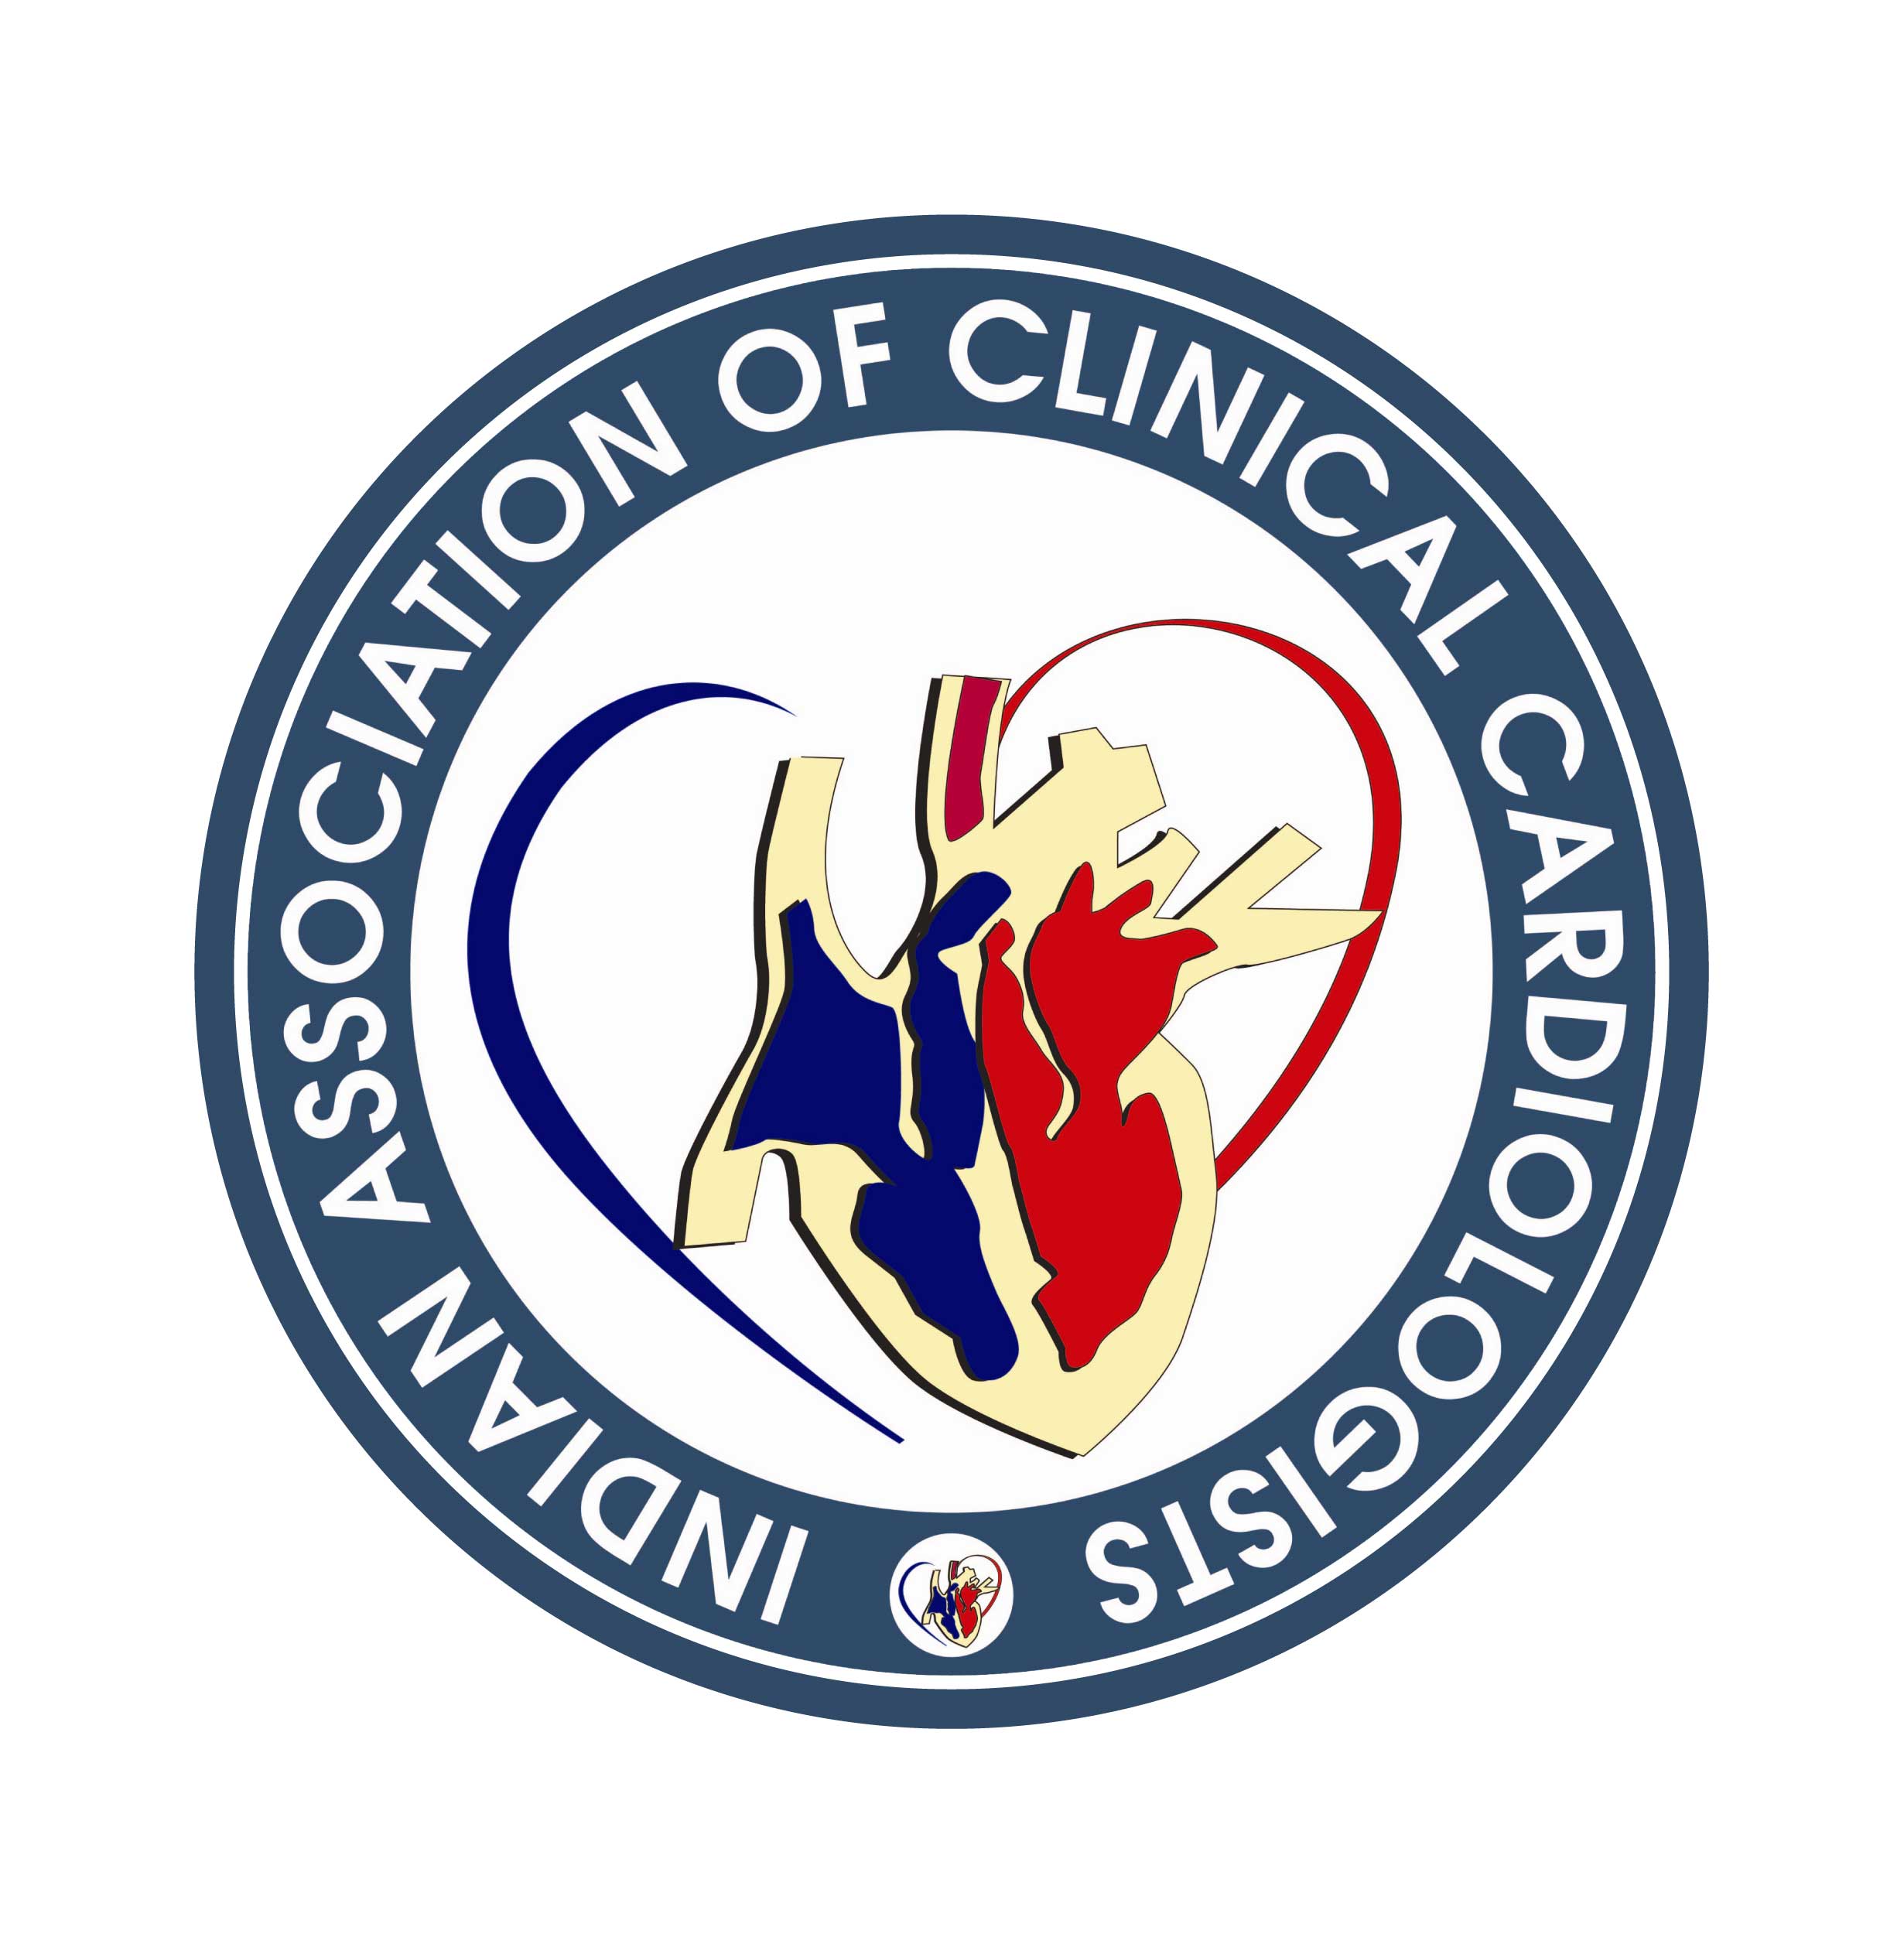 Indian Association of Clinical Cardiologists (IACC)